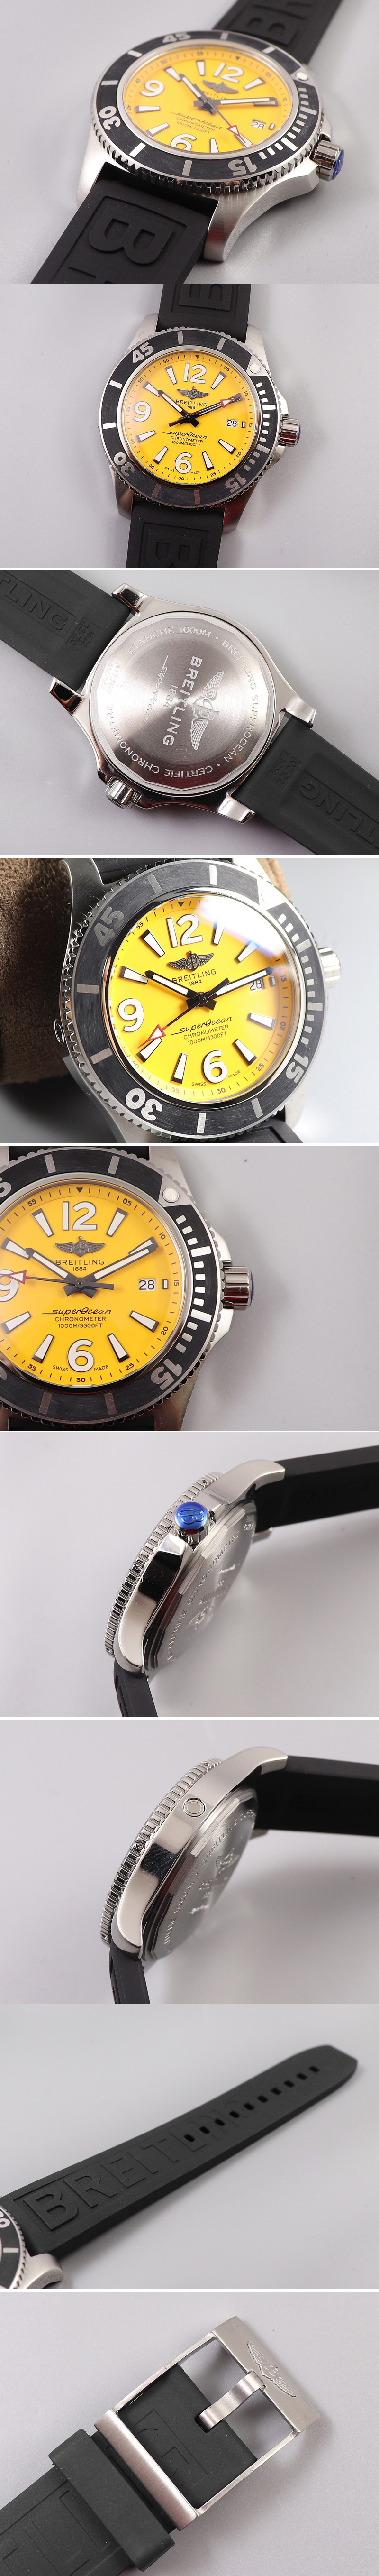 Replica Breitling Superocean Automatic 44 TF 1:1 Best Edition Yellow Dial Black Bezel on Black Rubber Strap A2824